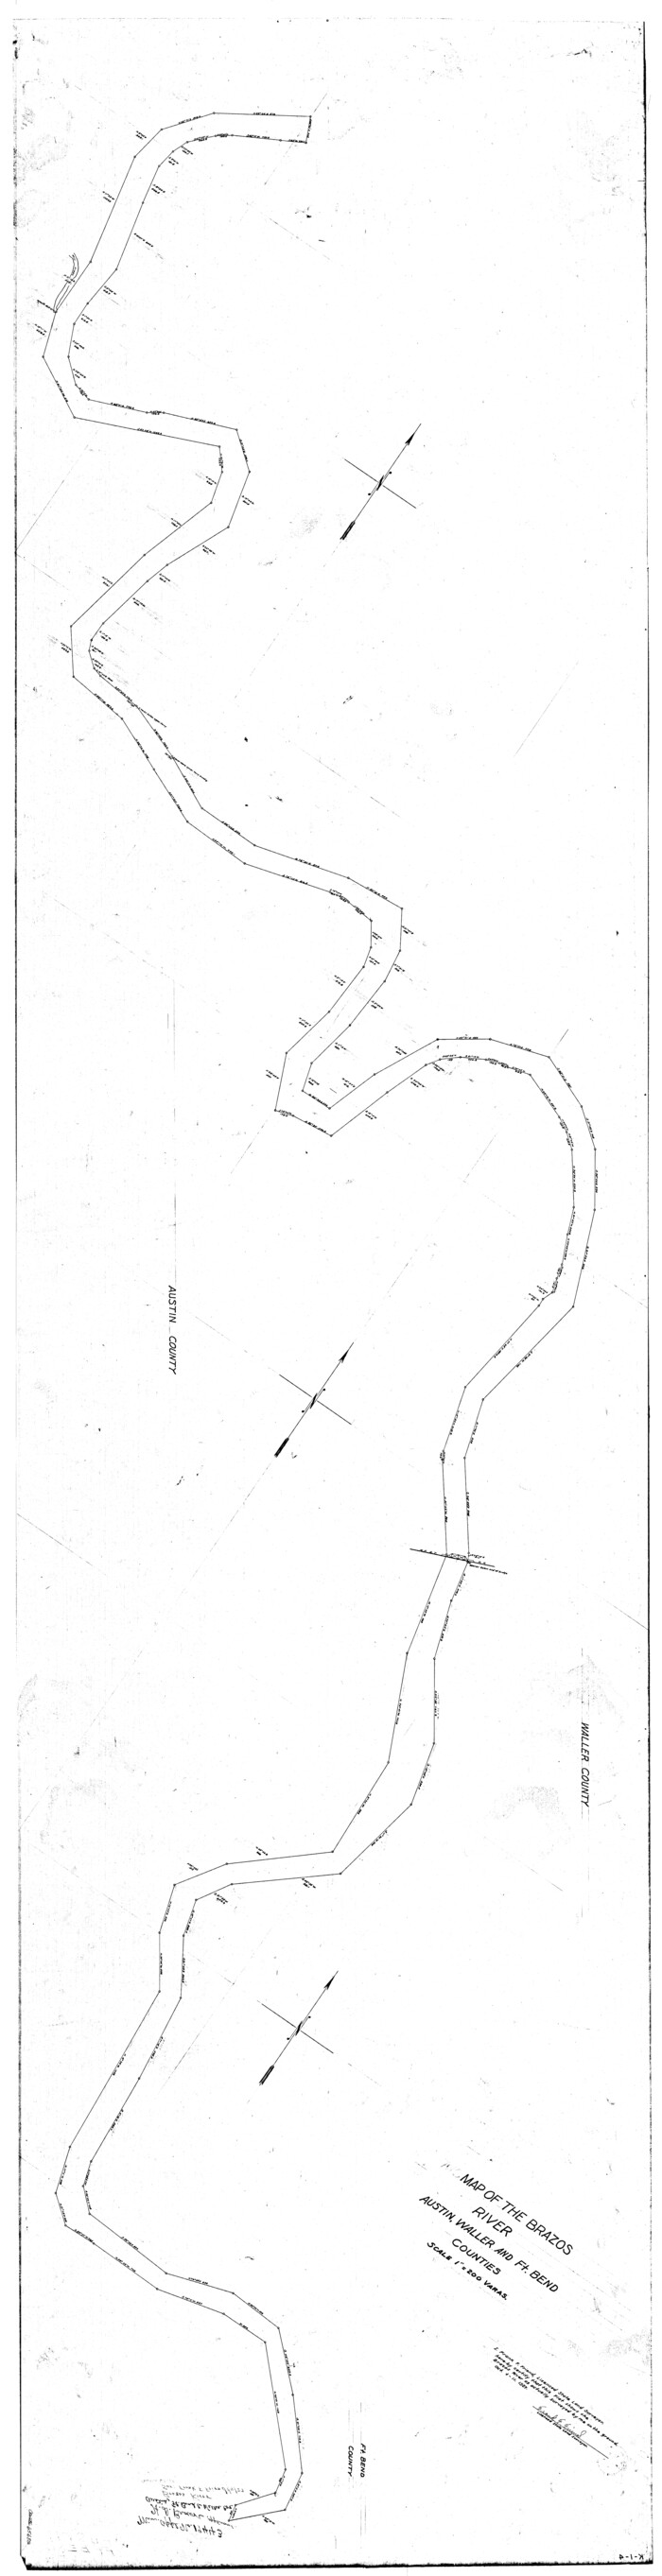 65682, [Sketch for Mineral Application 19443 - Brazos River], General Map Collection